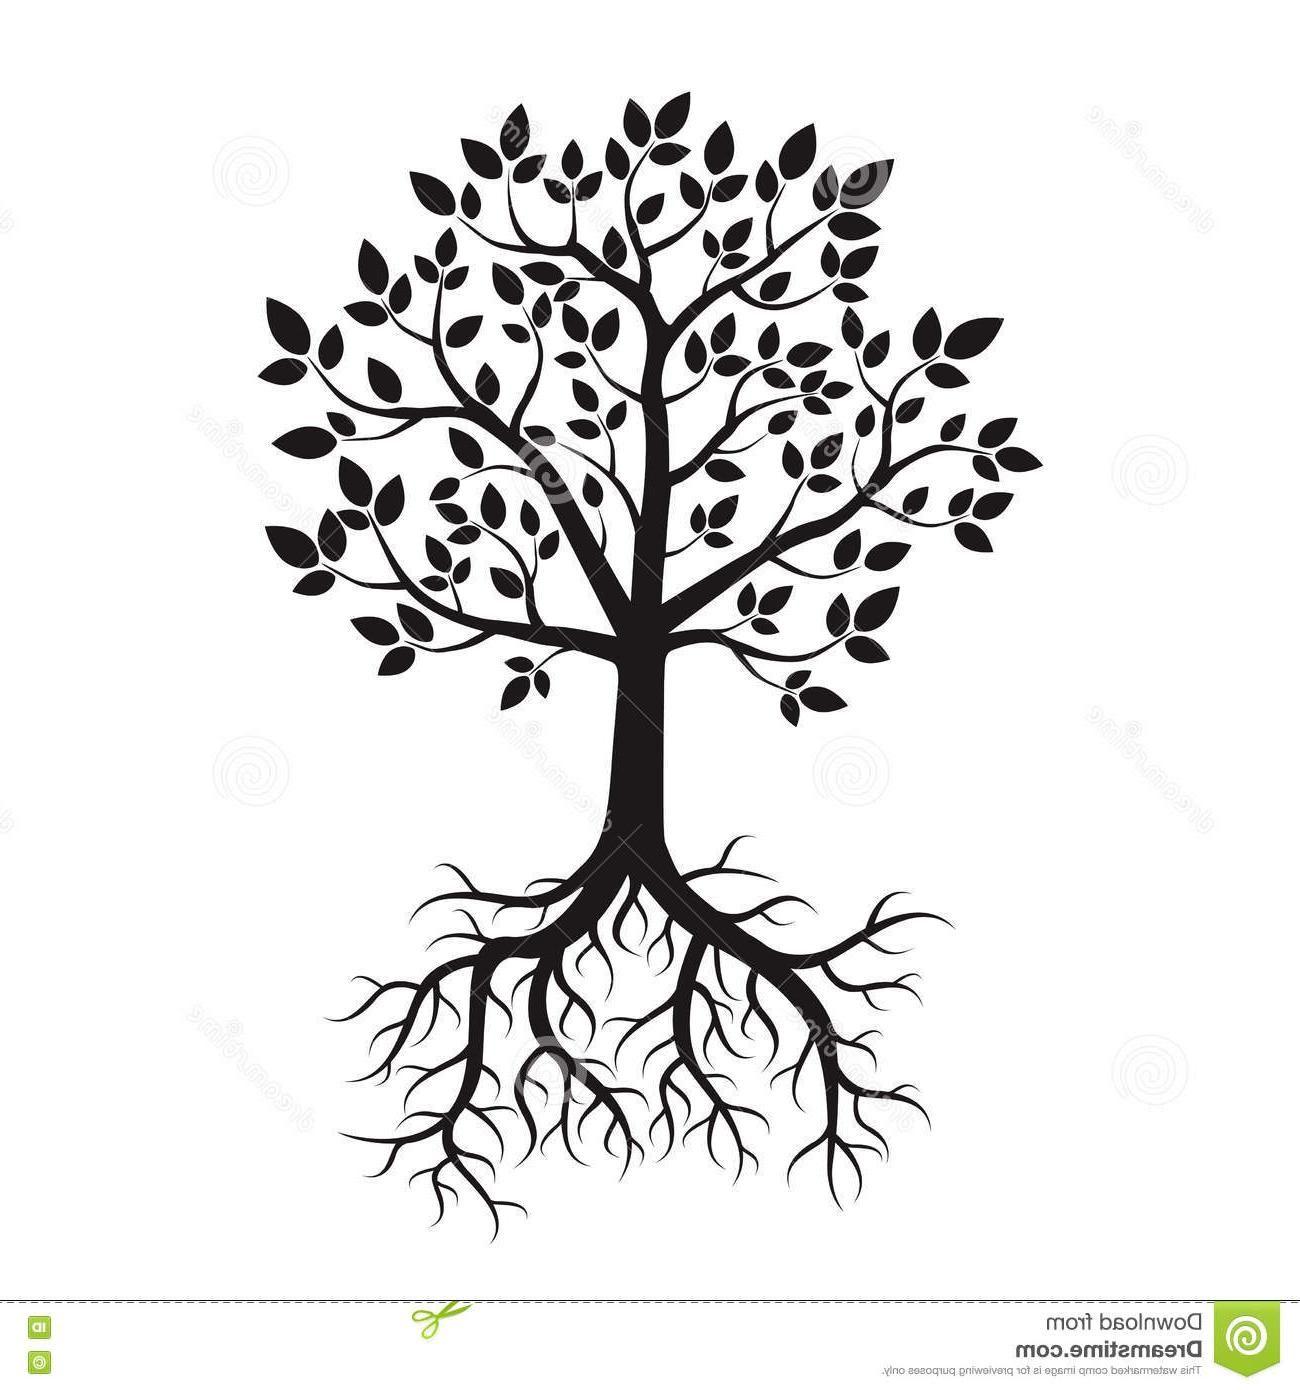 Black and White Tree with Roots Logo - Top 10 Black Tree Roots Vector Illustration Nature Image